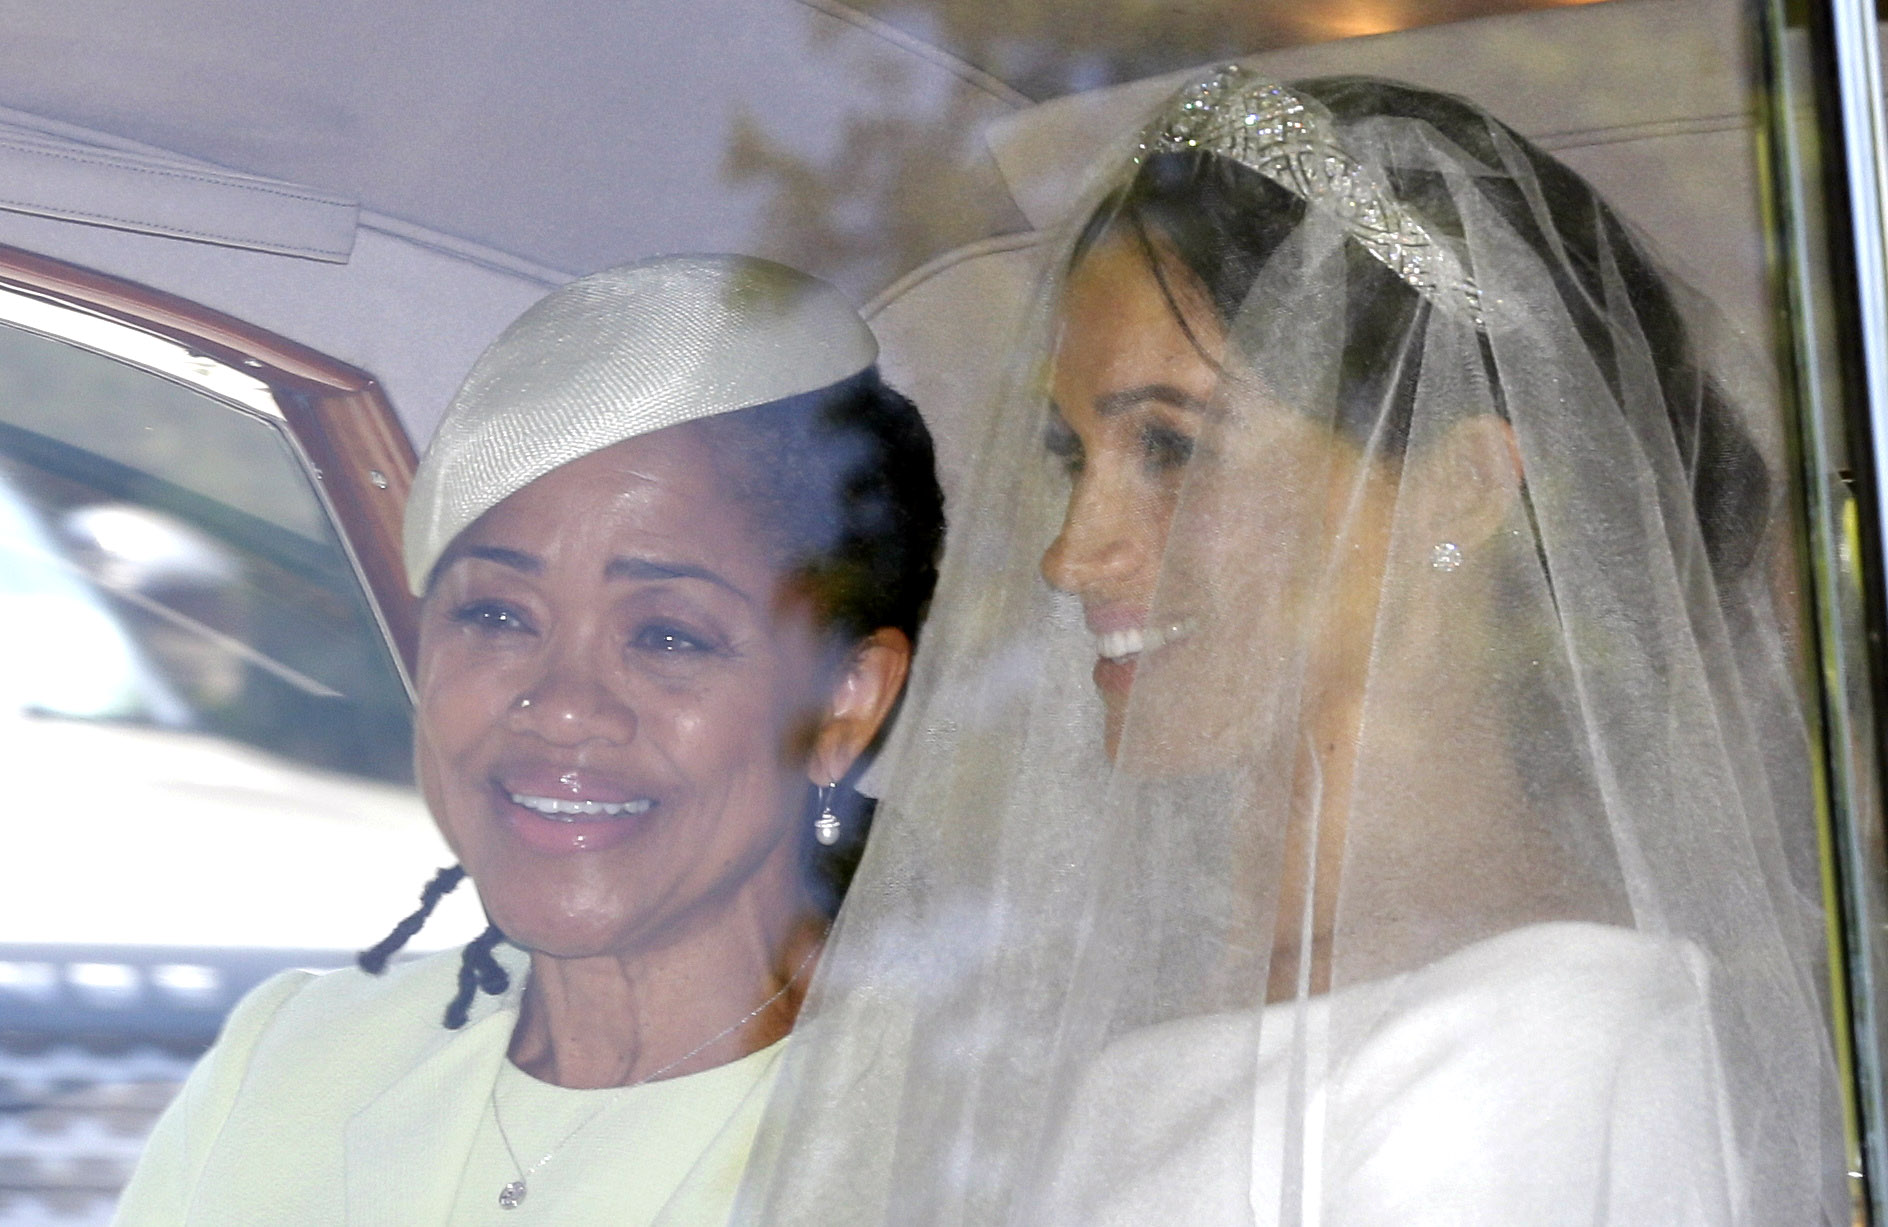 PHOTO: Meghan Markle, right, and her mother Doria Ragland leave Cliveden House Hotel in Taplow, May 19, 2018 where she stayed before Markle's wedding ceremony with Prince Harry at St. George's Chapel in Windsor Castle.